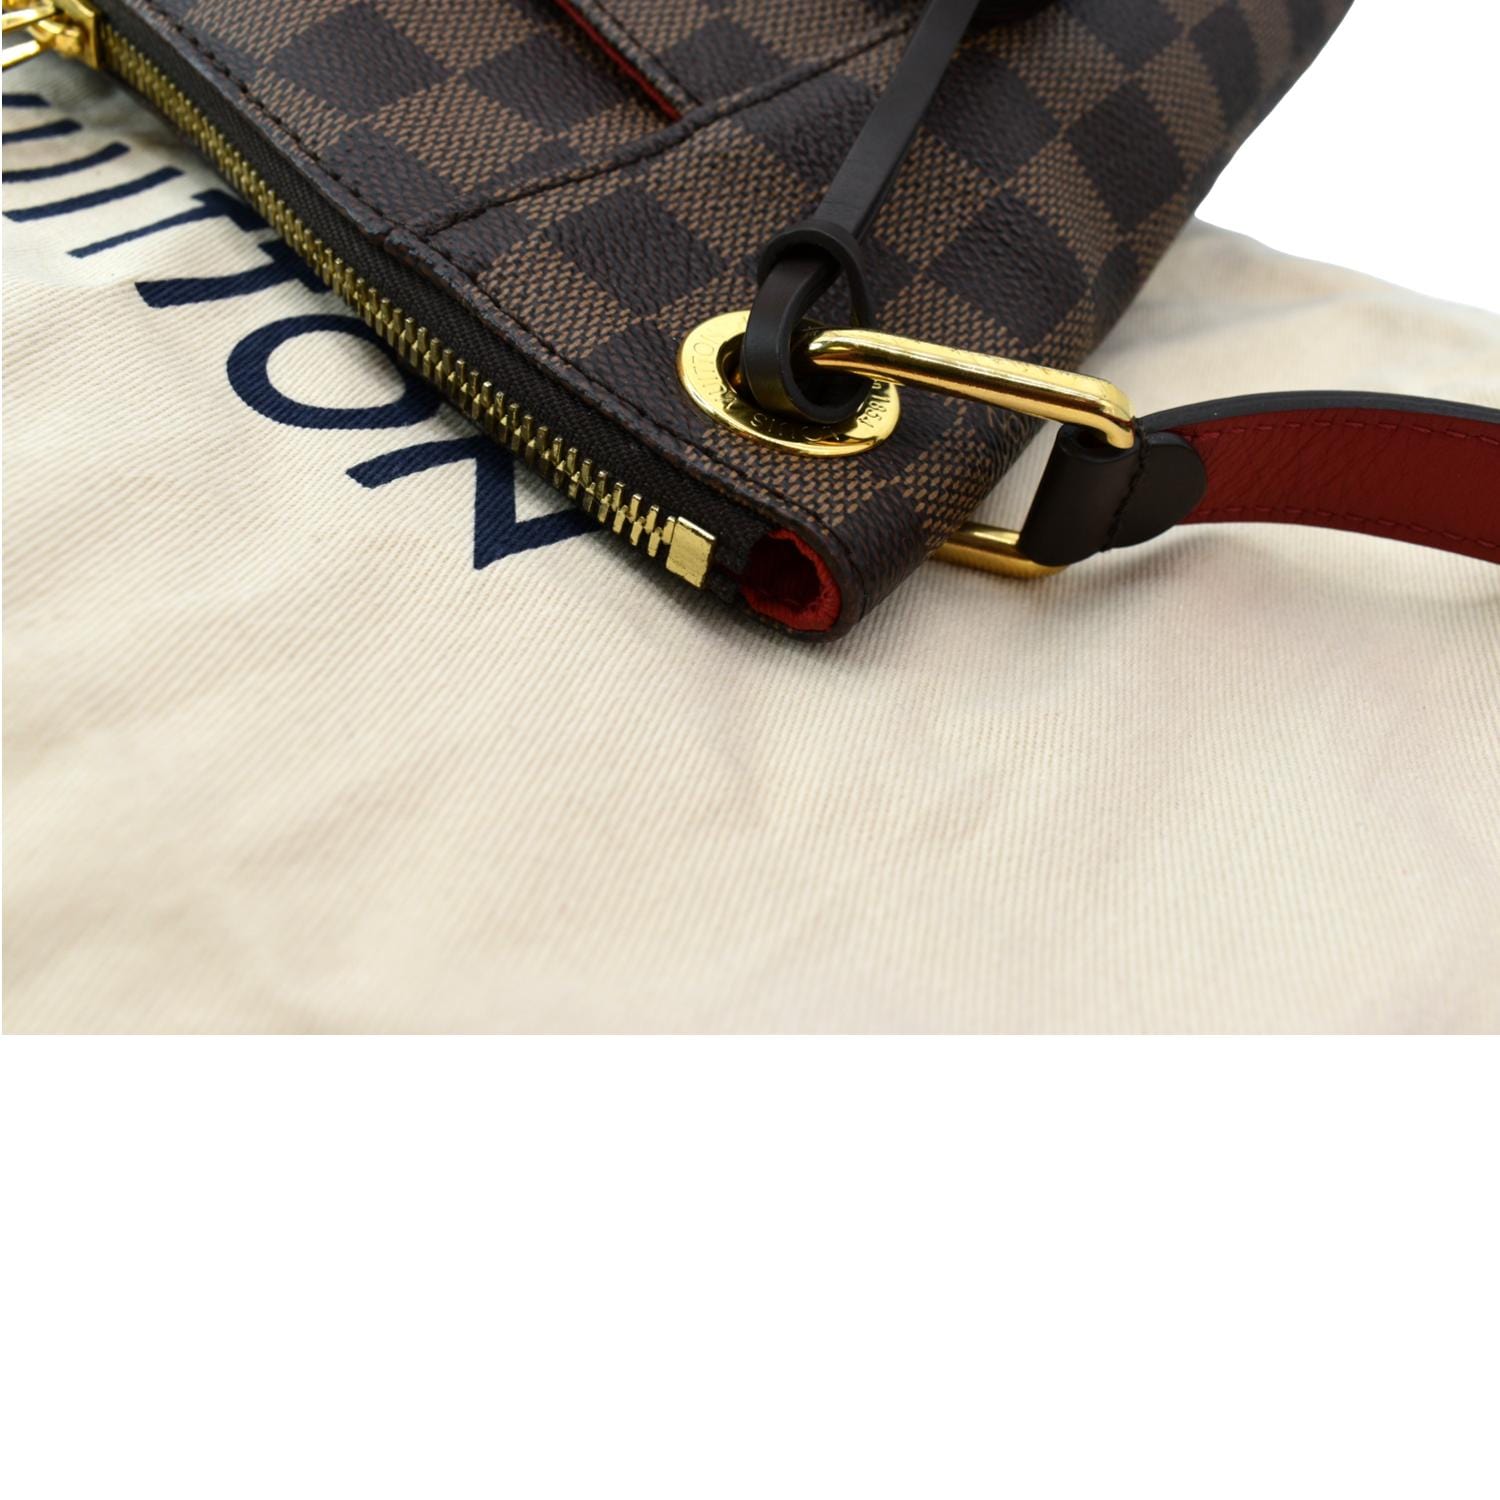 Louis Vuitton South Bank Besace overview #lvcrossbody #delv